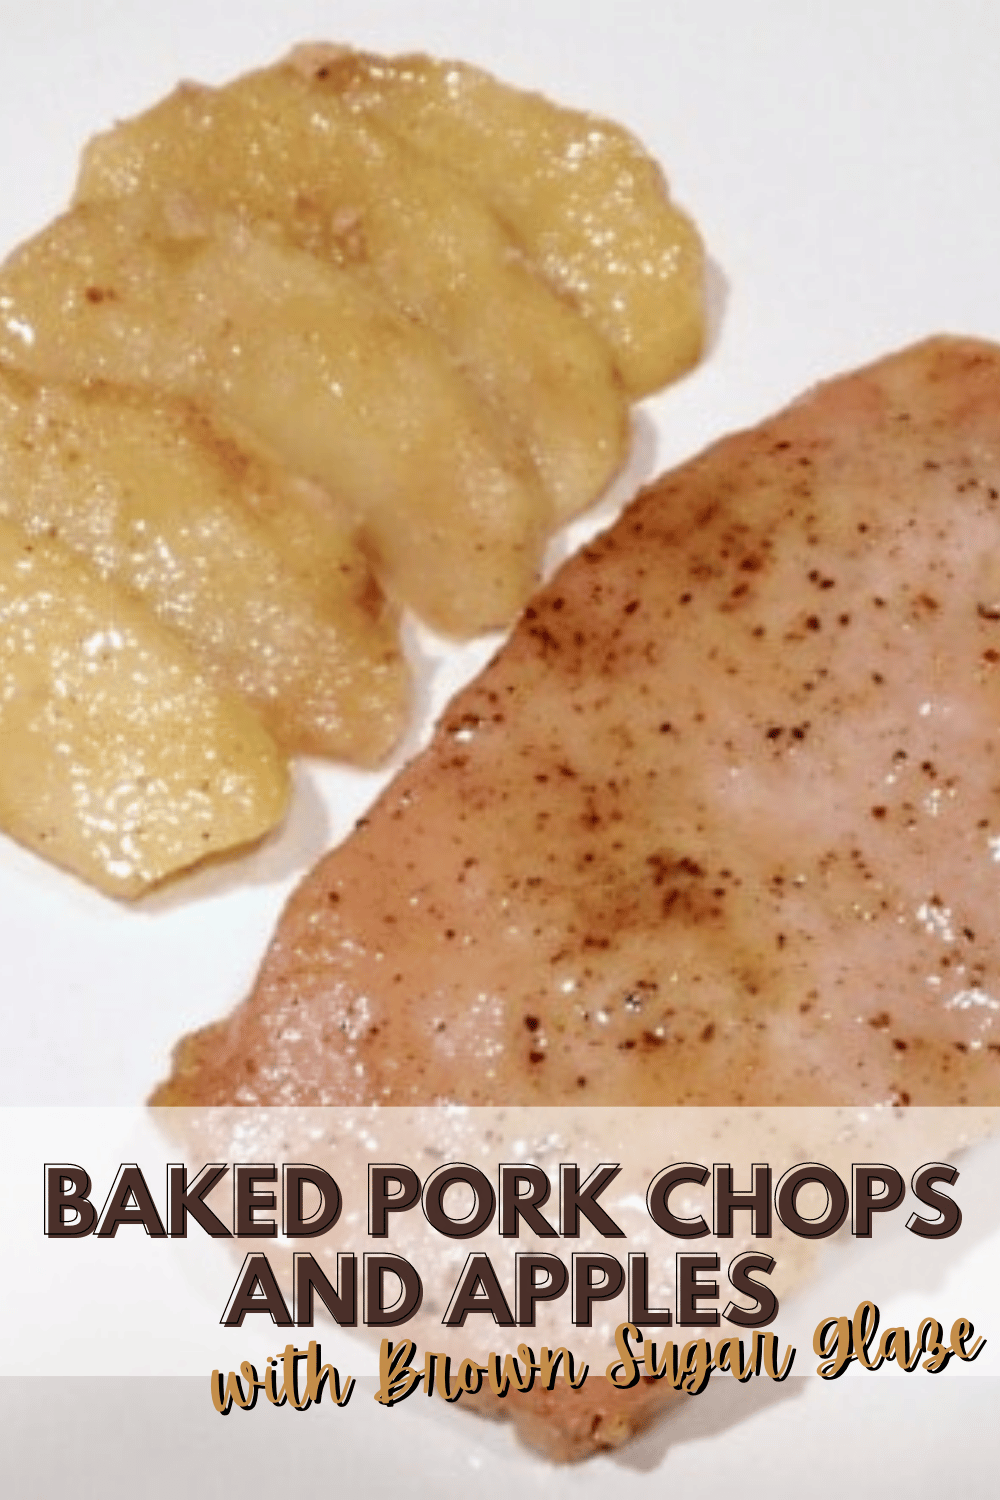 A simple dinner that kids will gobble up and beg you to make again! #porkchops #apples #easydinner via @wondermomwannab